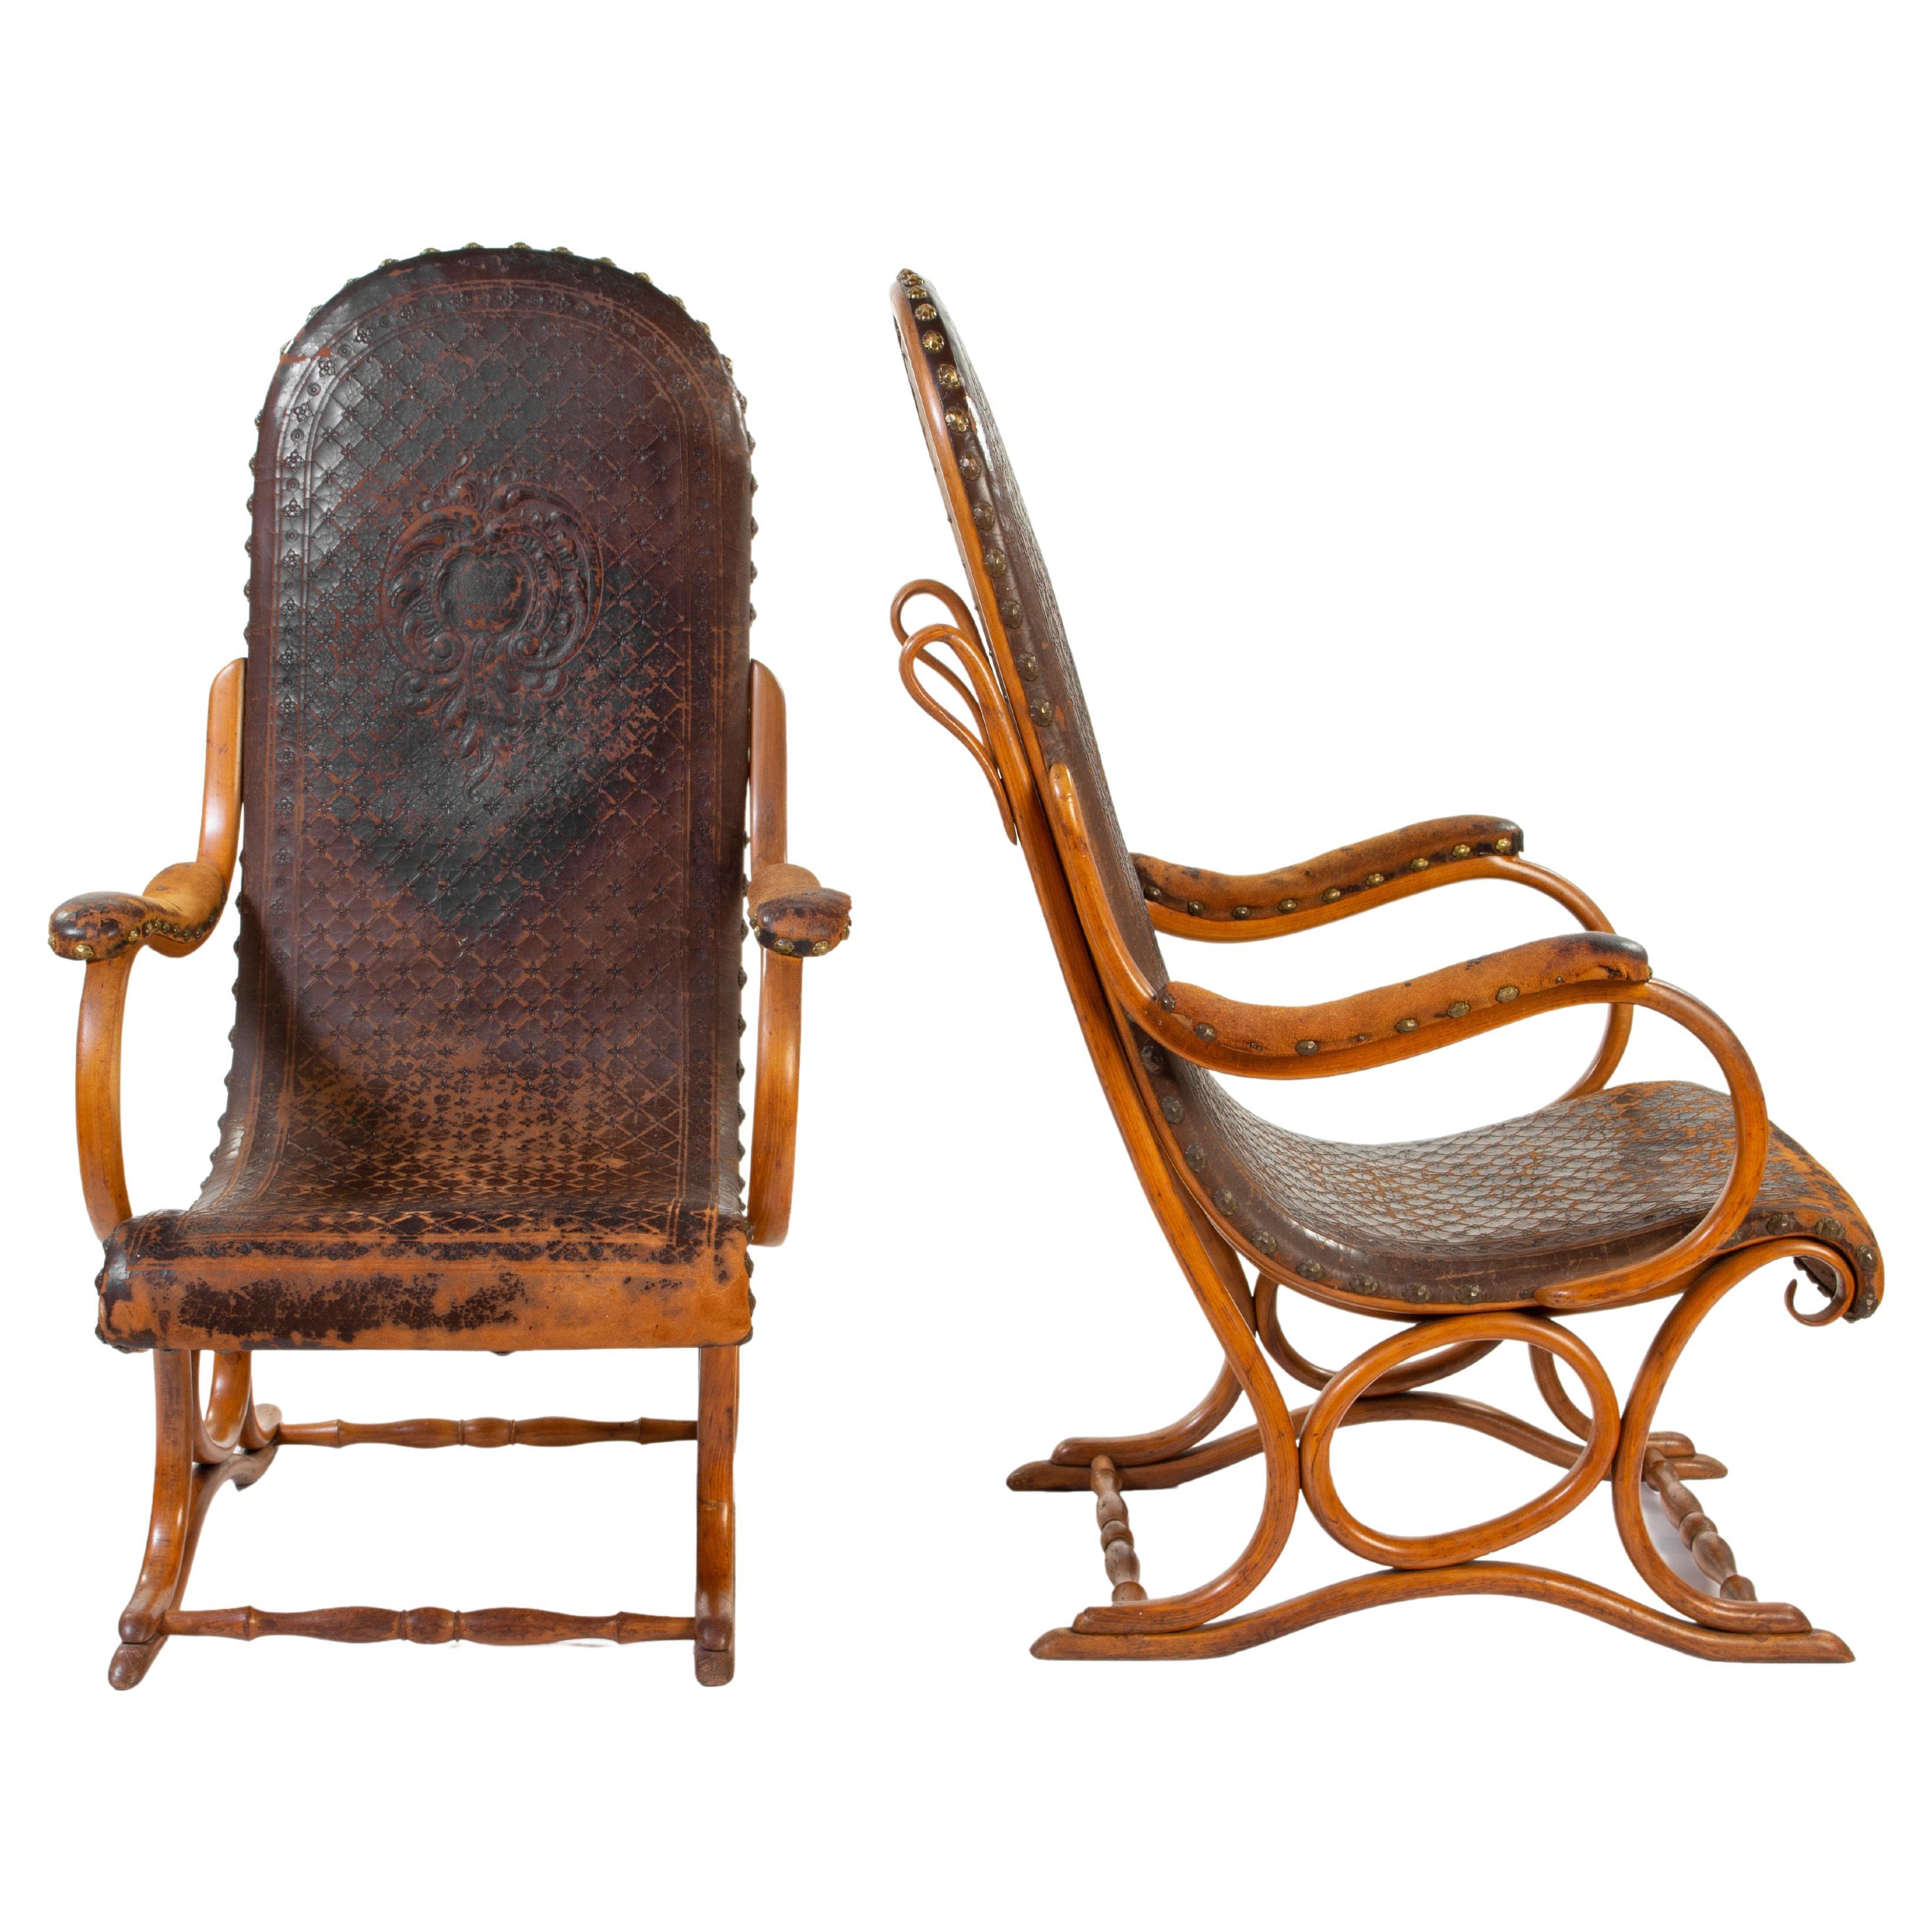 Bentwood Armchairs in Pair, Model No. 1, Designed by Gebrüder Thonet c. 1900